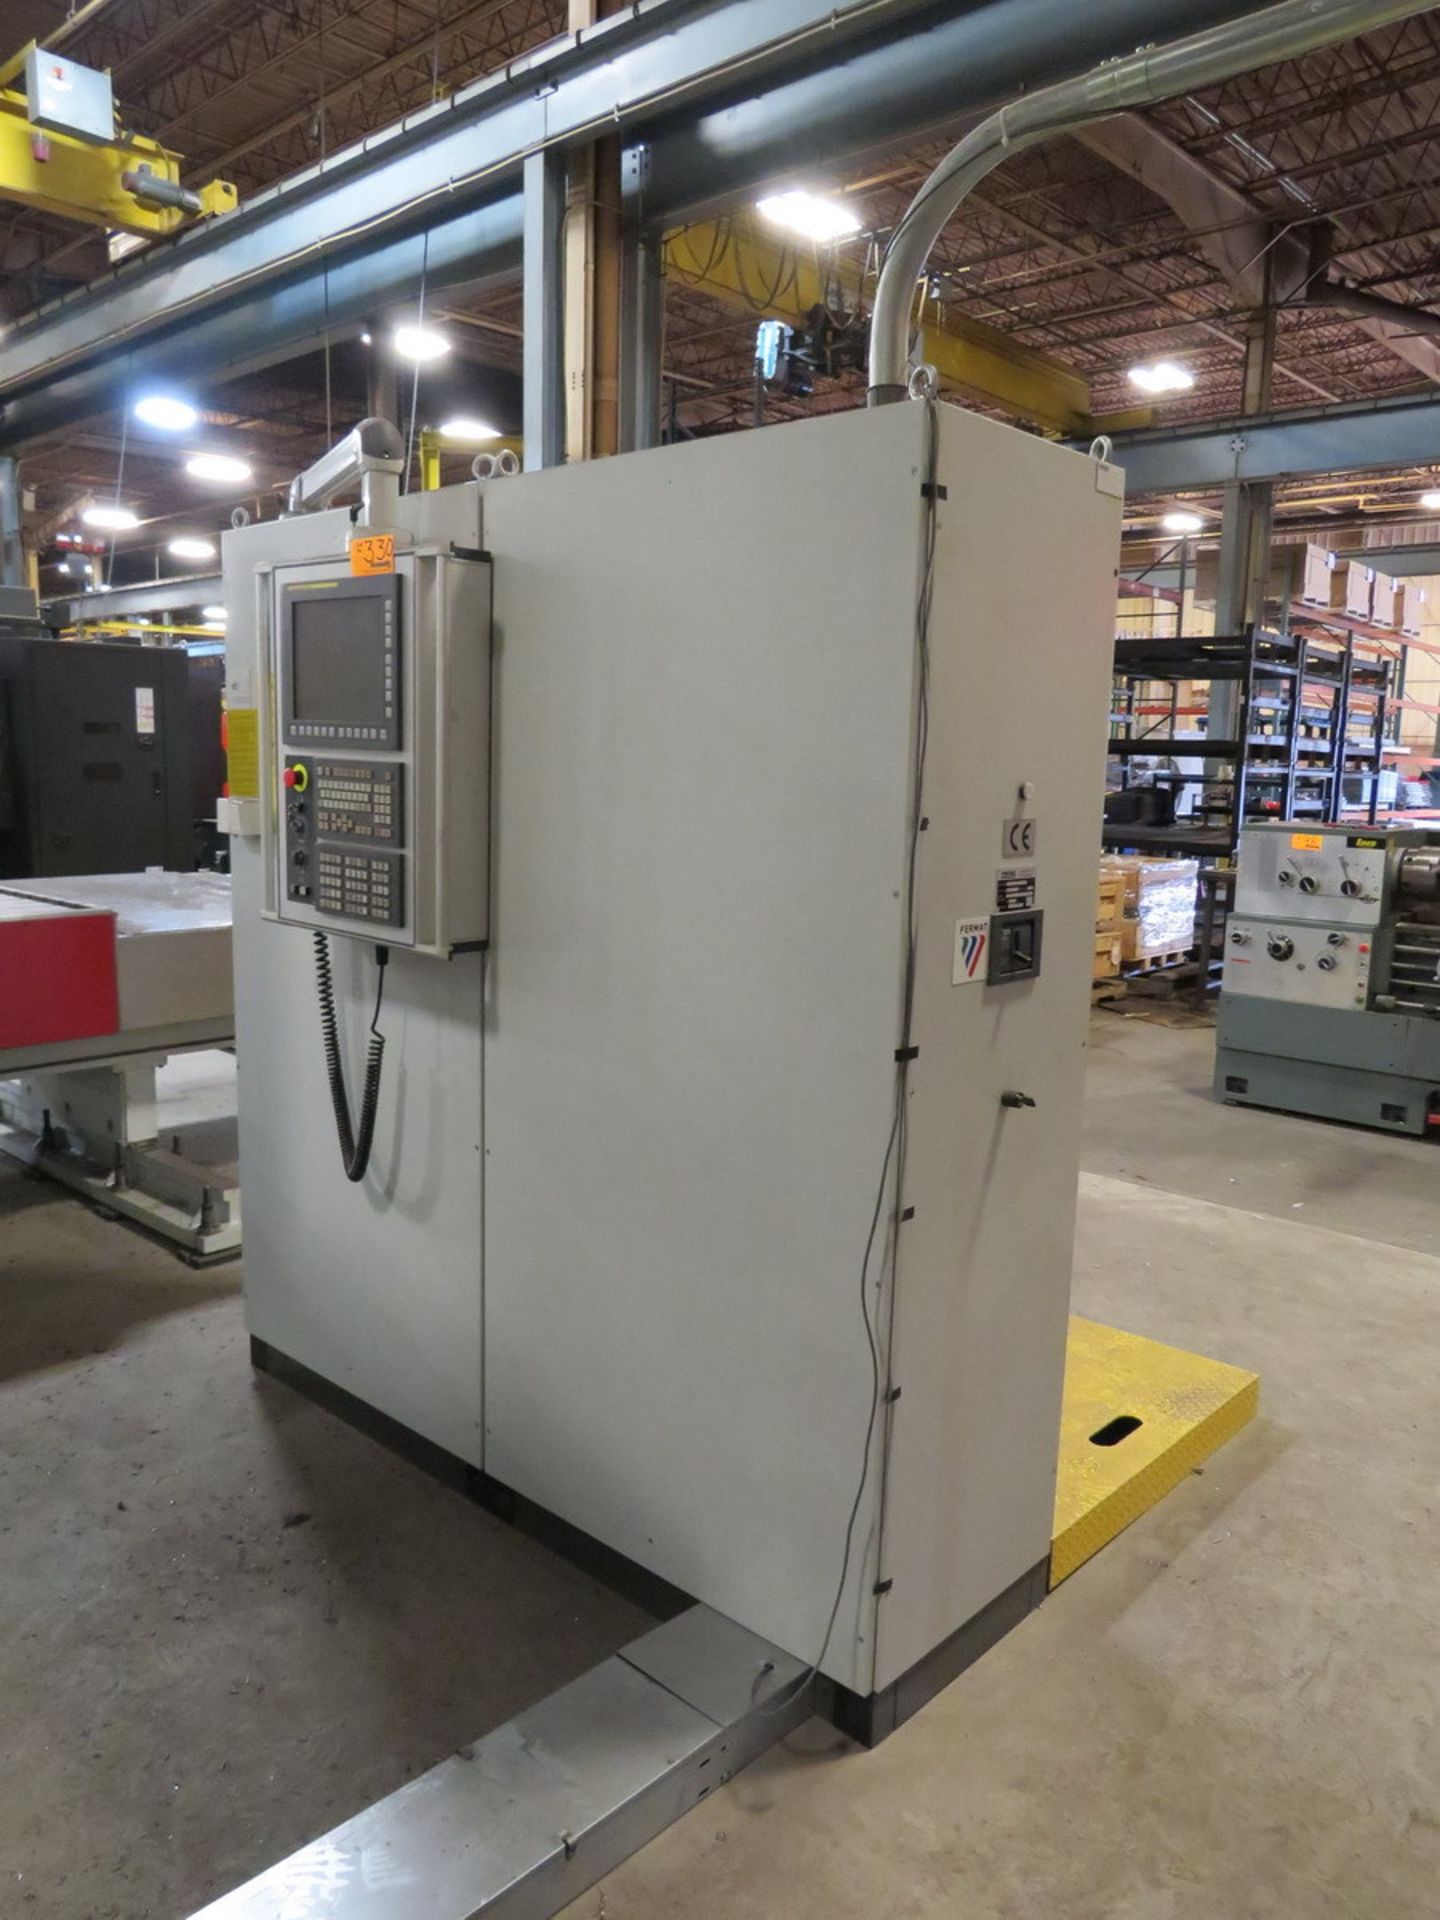 2018 Lucas 40-0T CNC Horizontal Boring Mill - Complete Remanufacture by OEM - Image 18 of 29